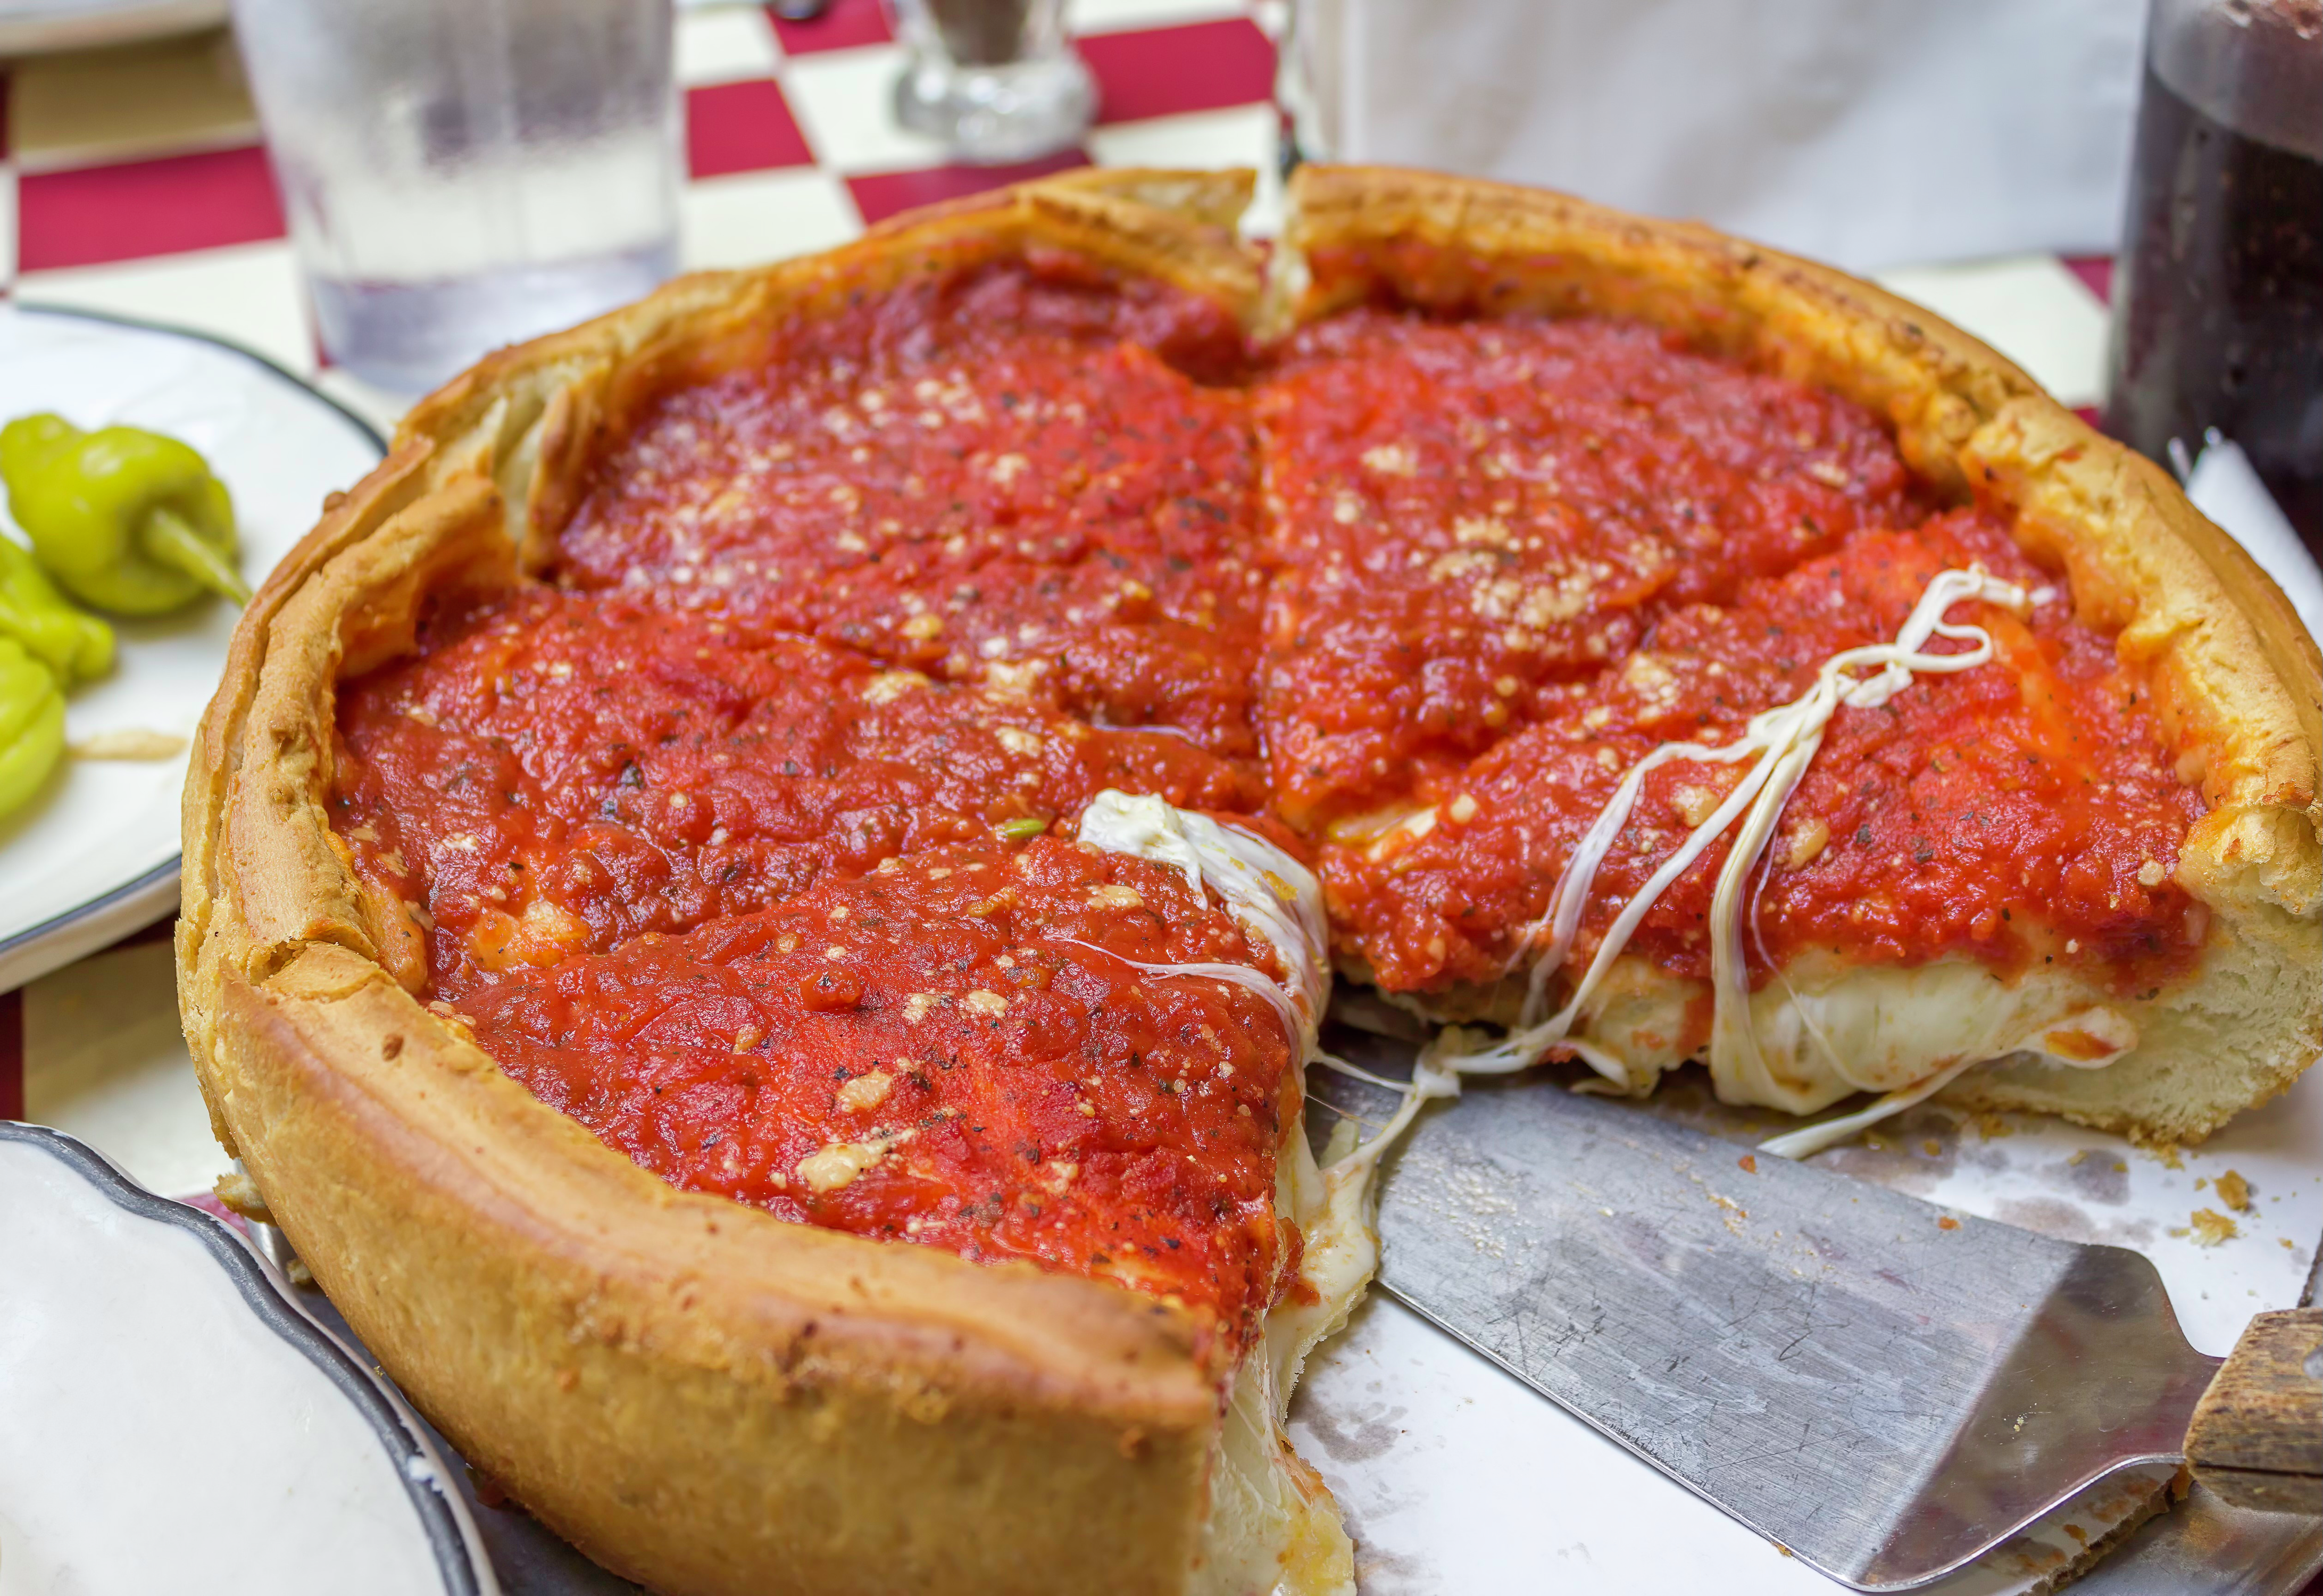 Chicago pizza staple weighs in on where the US pizza capital is located